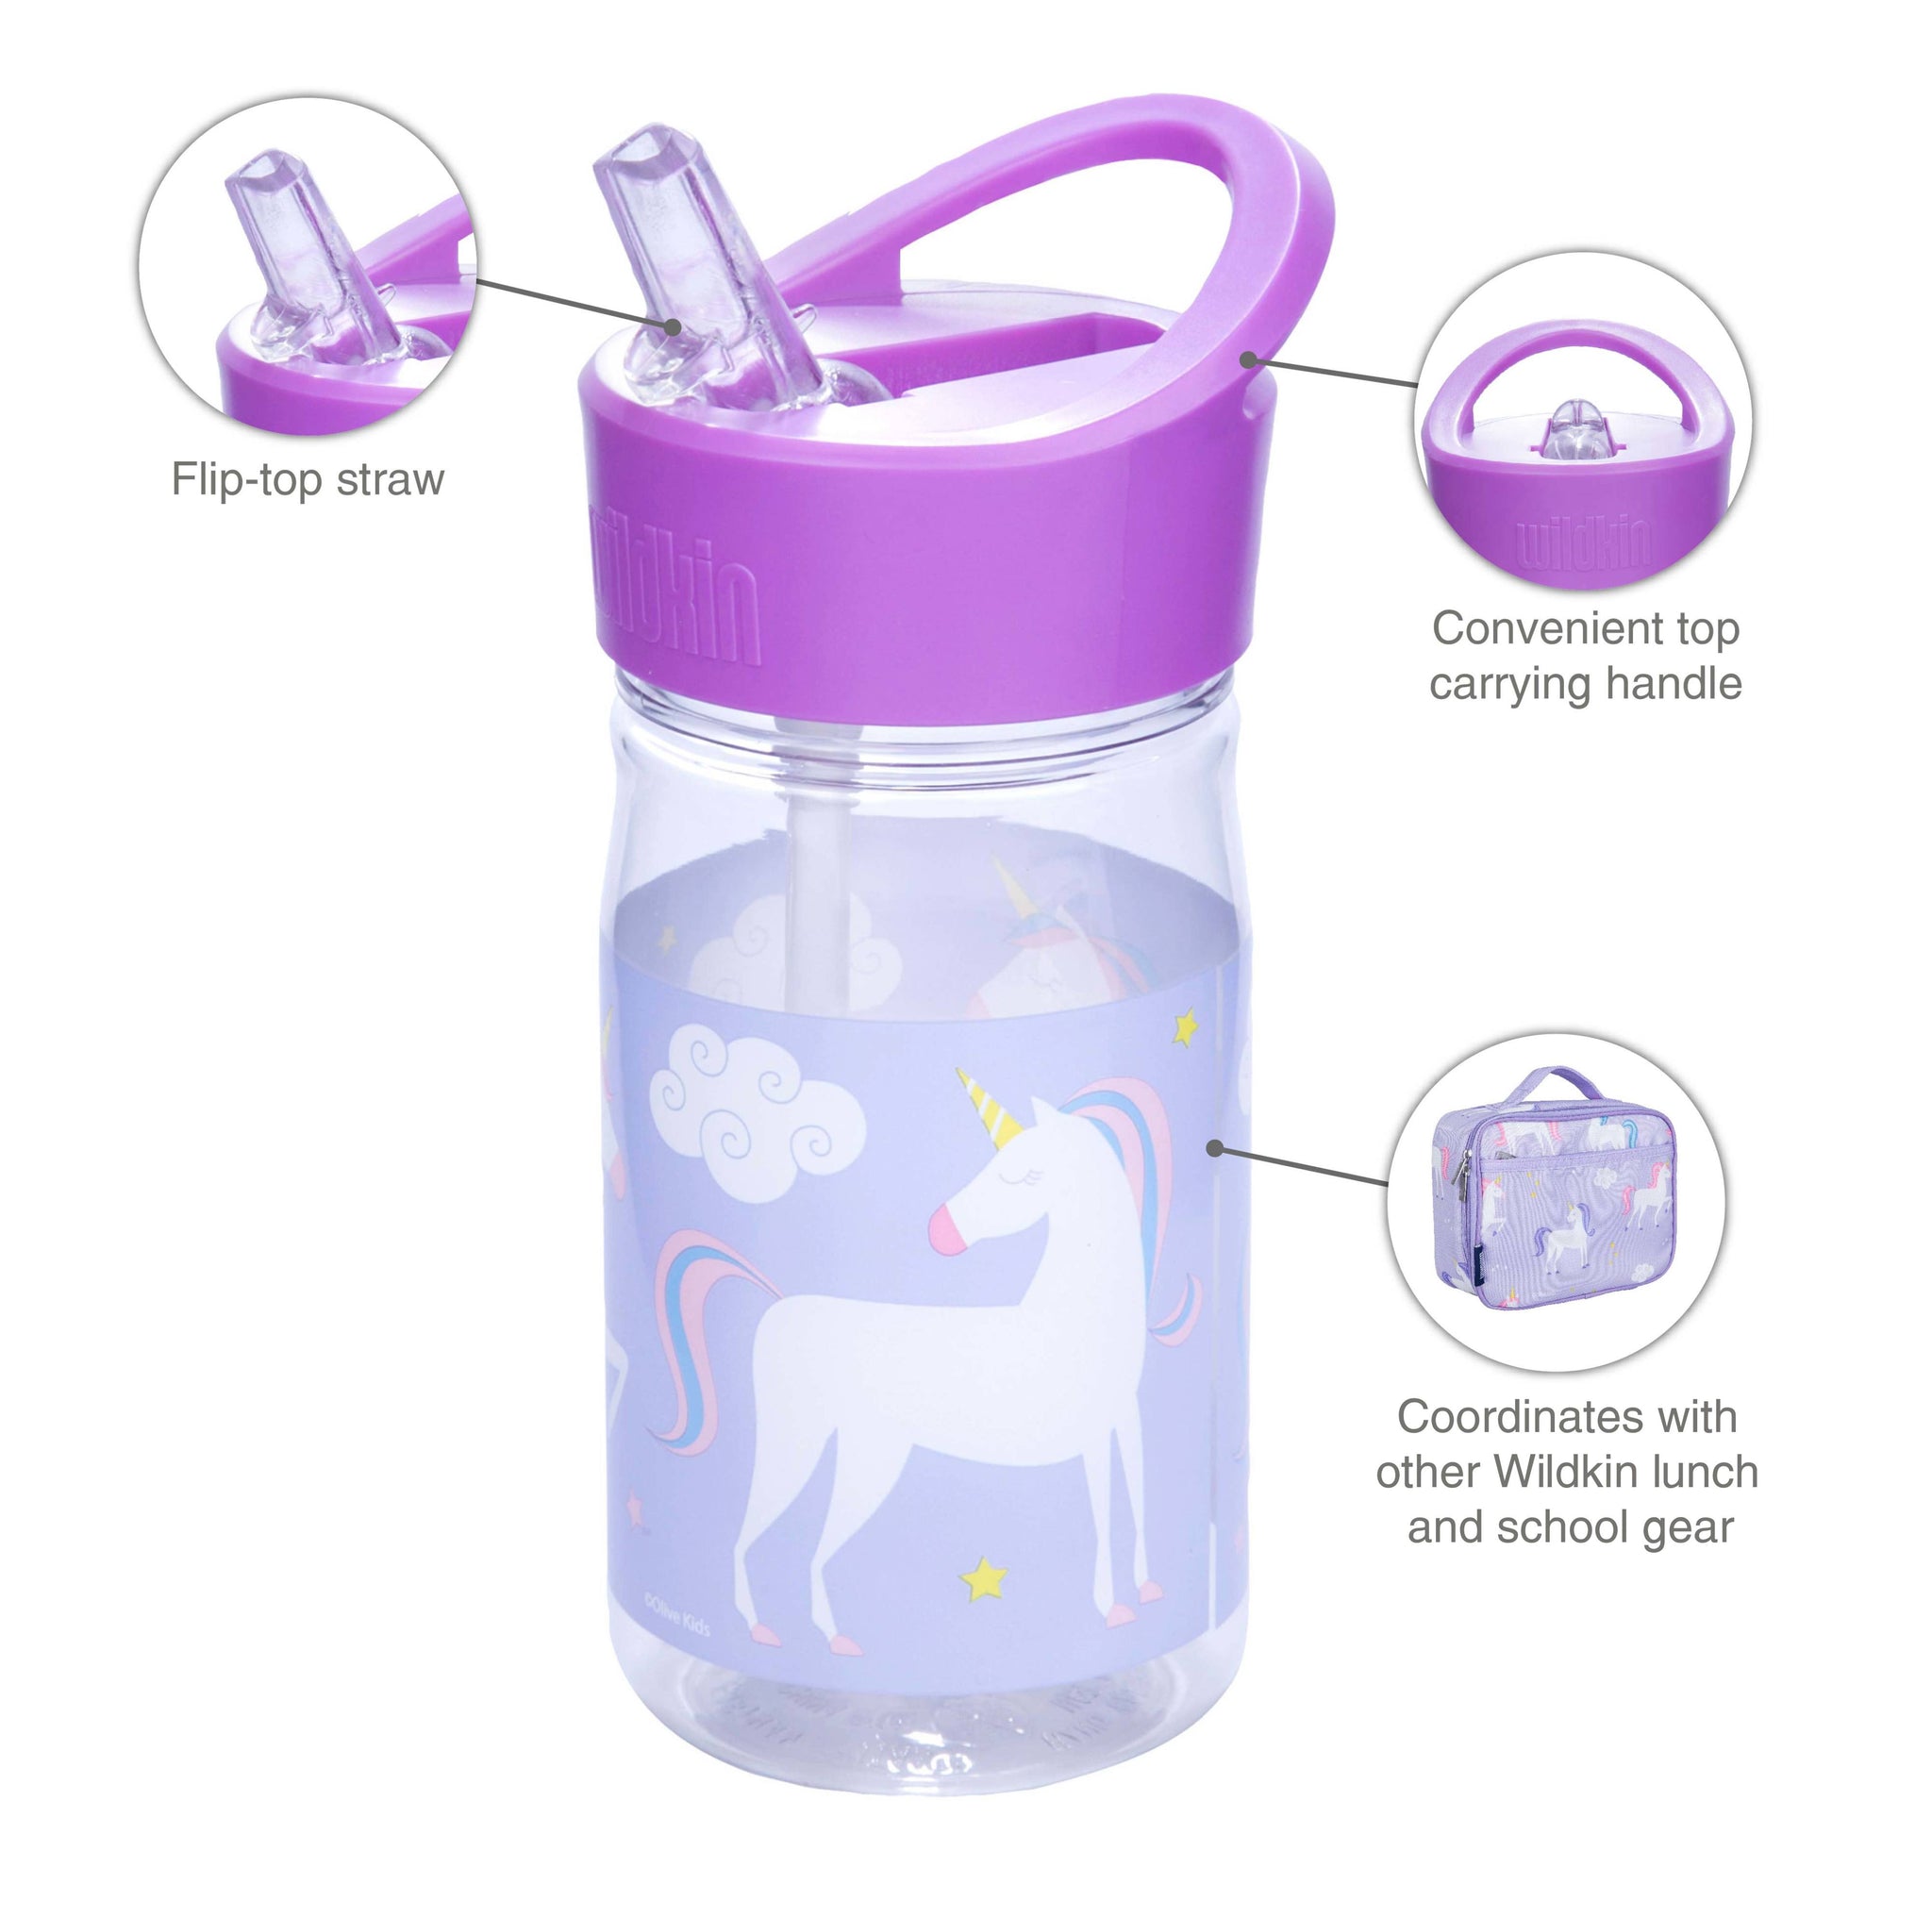 Wildkin Unicorn Water Bottle Gifts For The Rider Kids at Chagrin